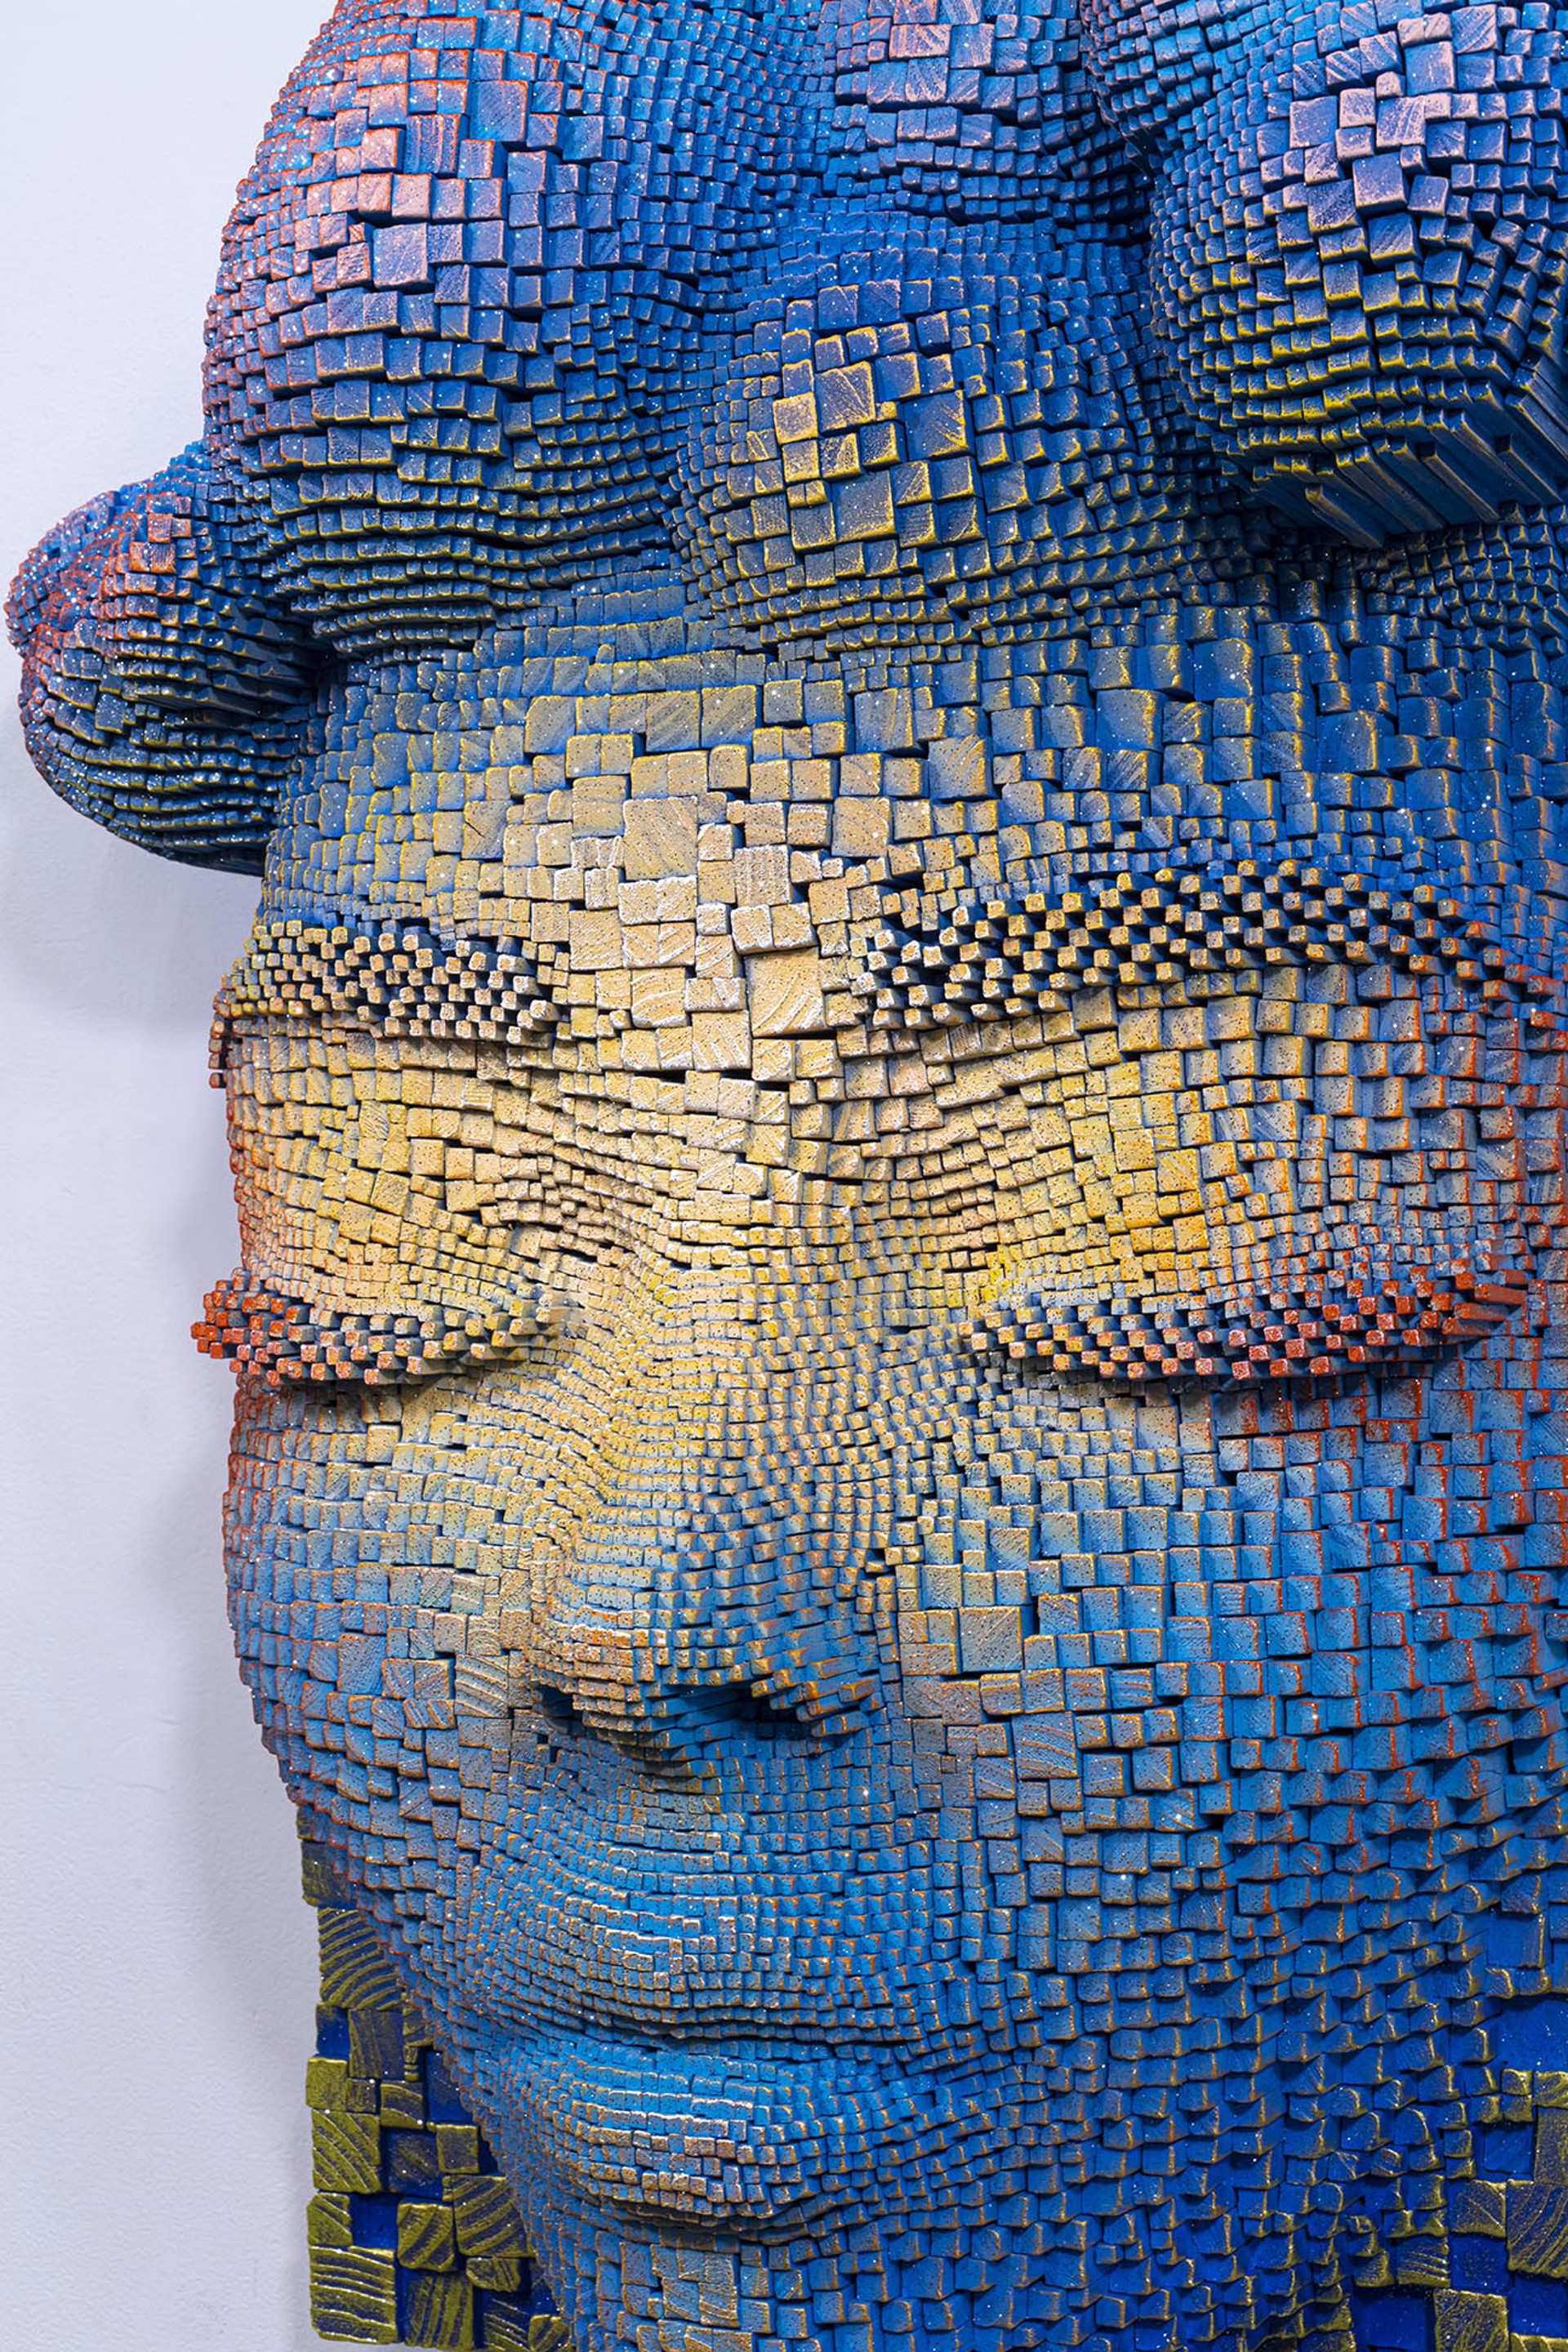 Head in the Clouds by Gil Bruvel